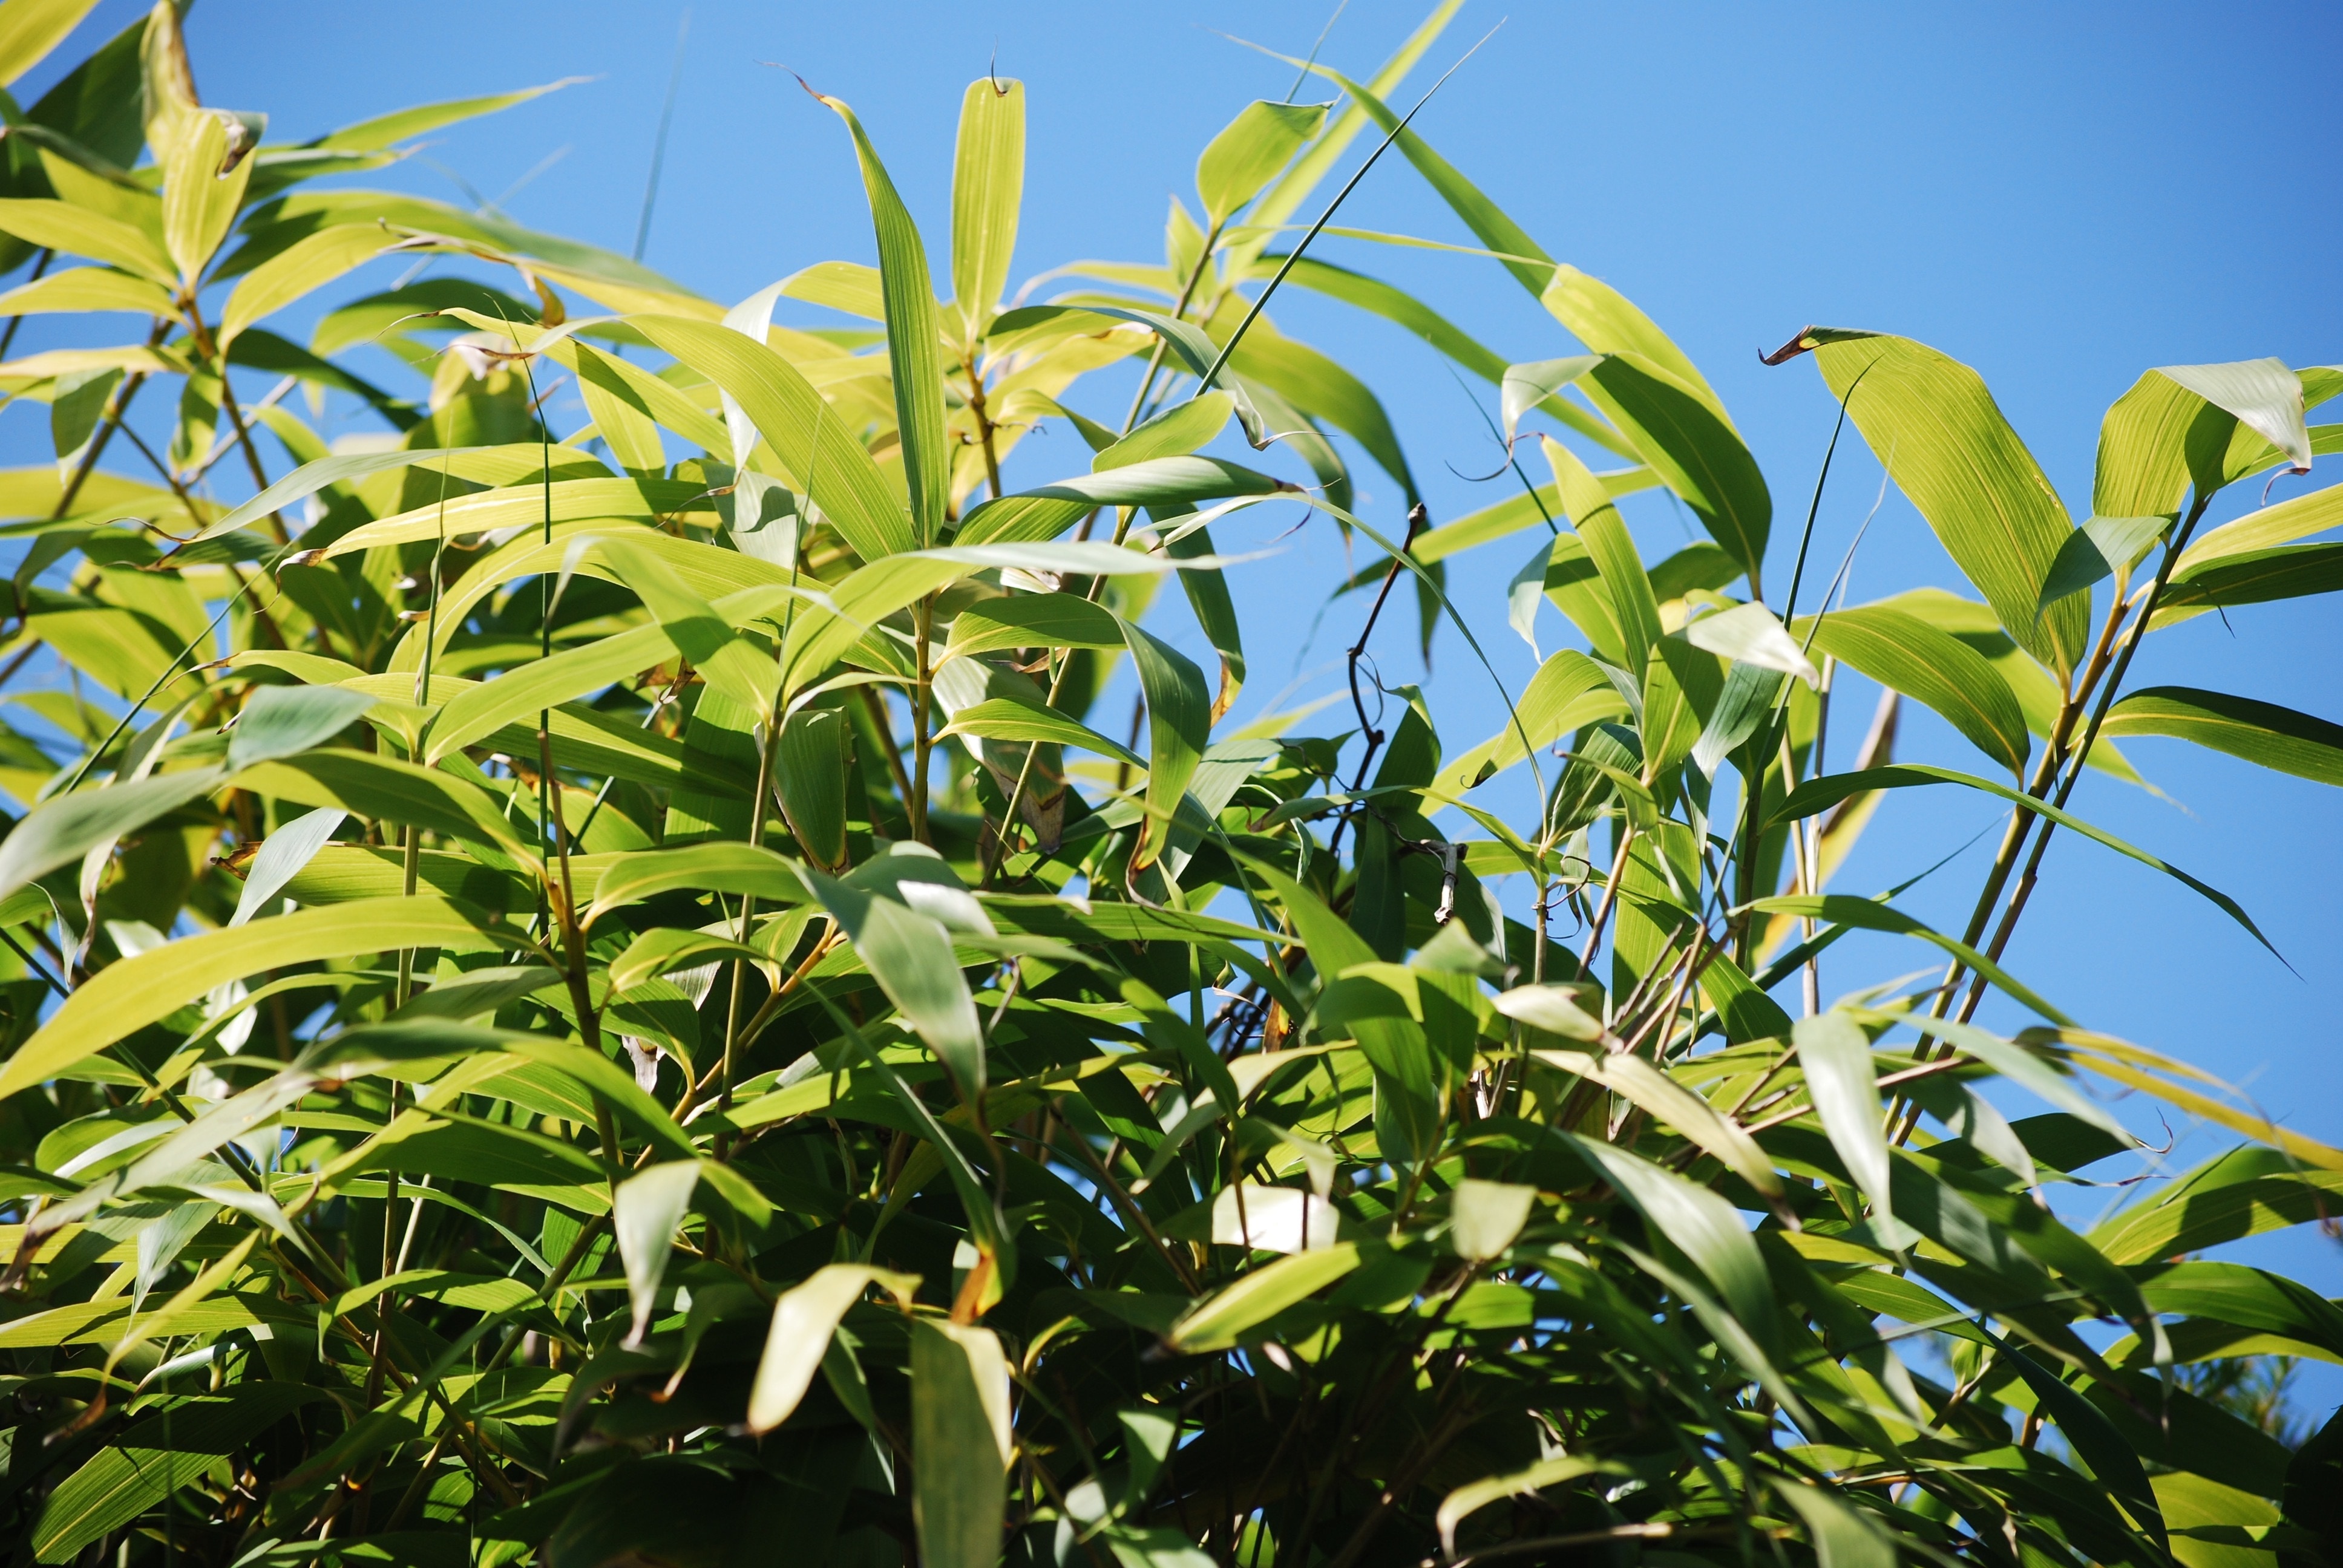 Sky, Bamboo, Nature, Bamboo Plants, agriculture, leaf